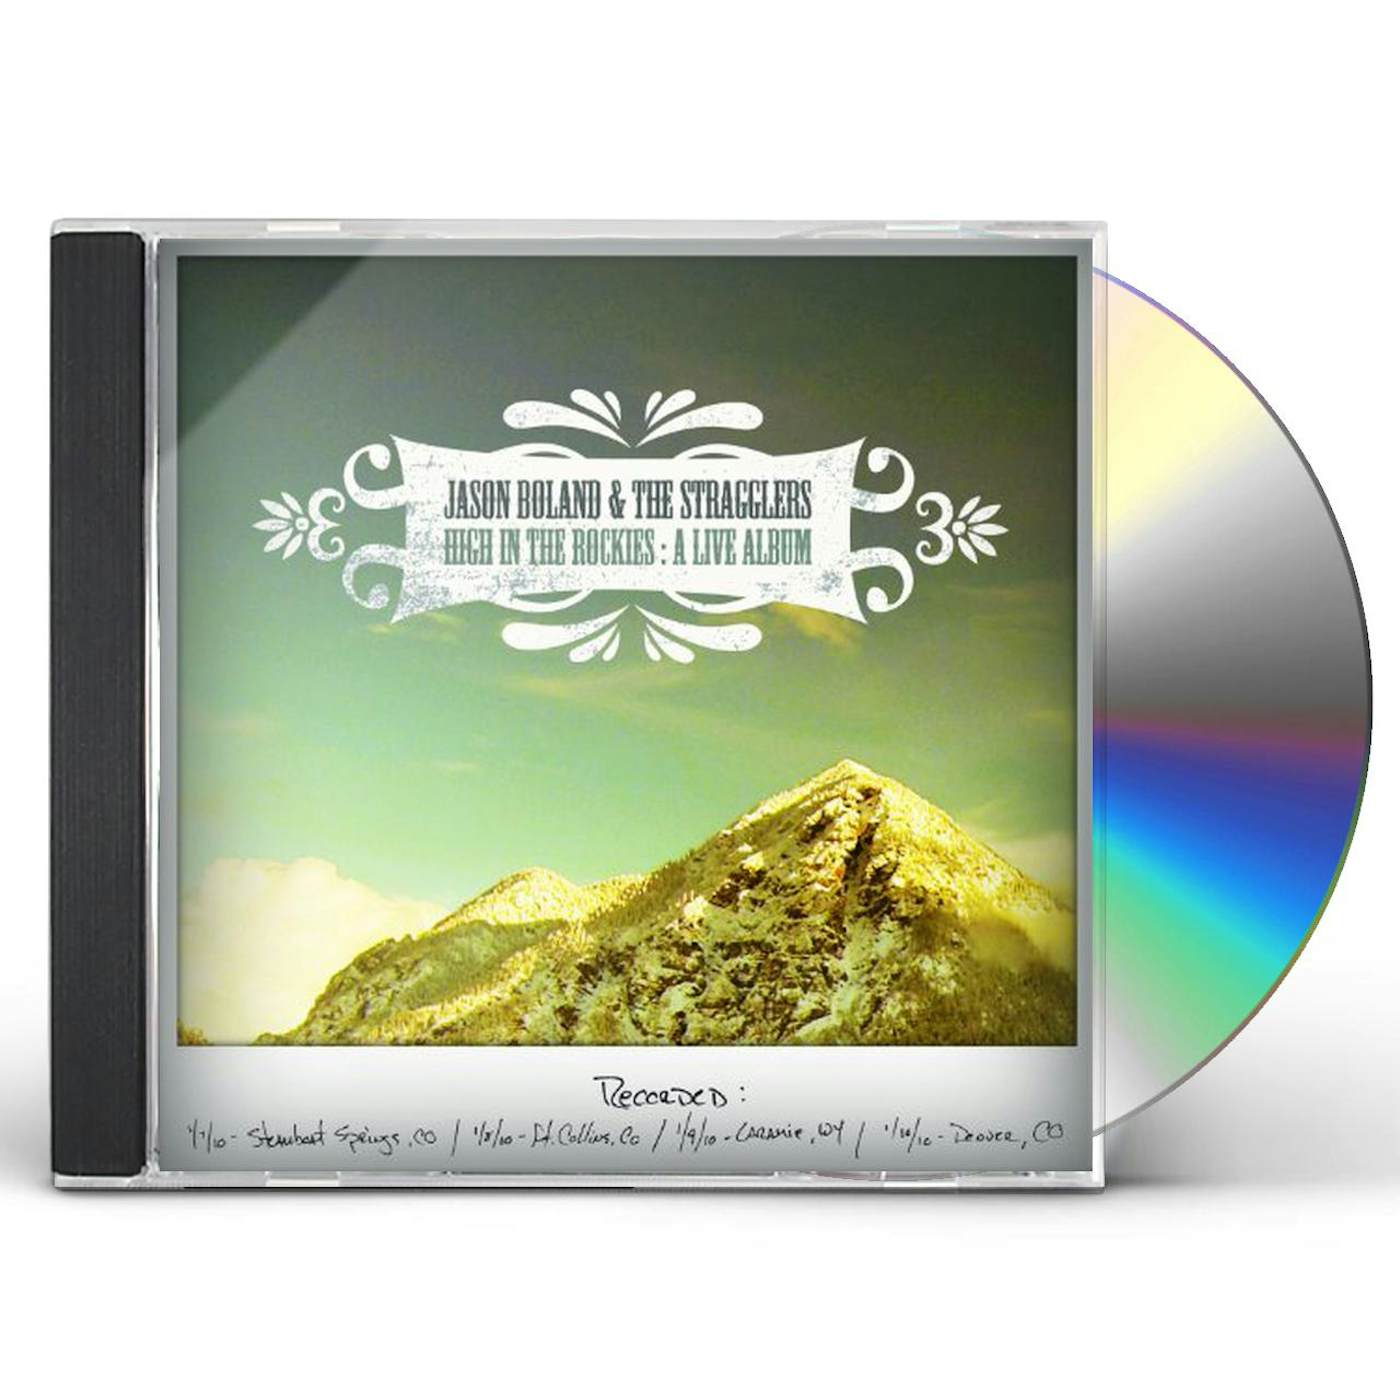 Jason Boland & The Stragglers HIGH IN THE ROCKIES CD